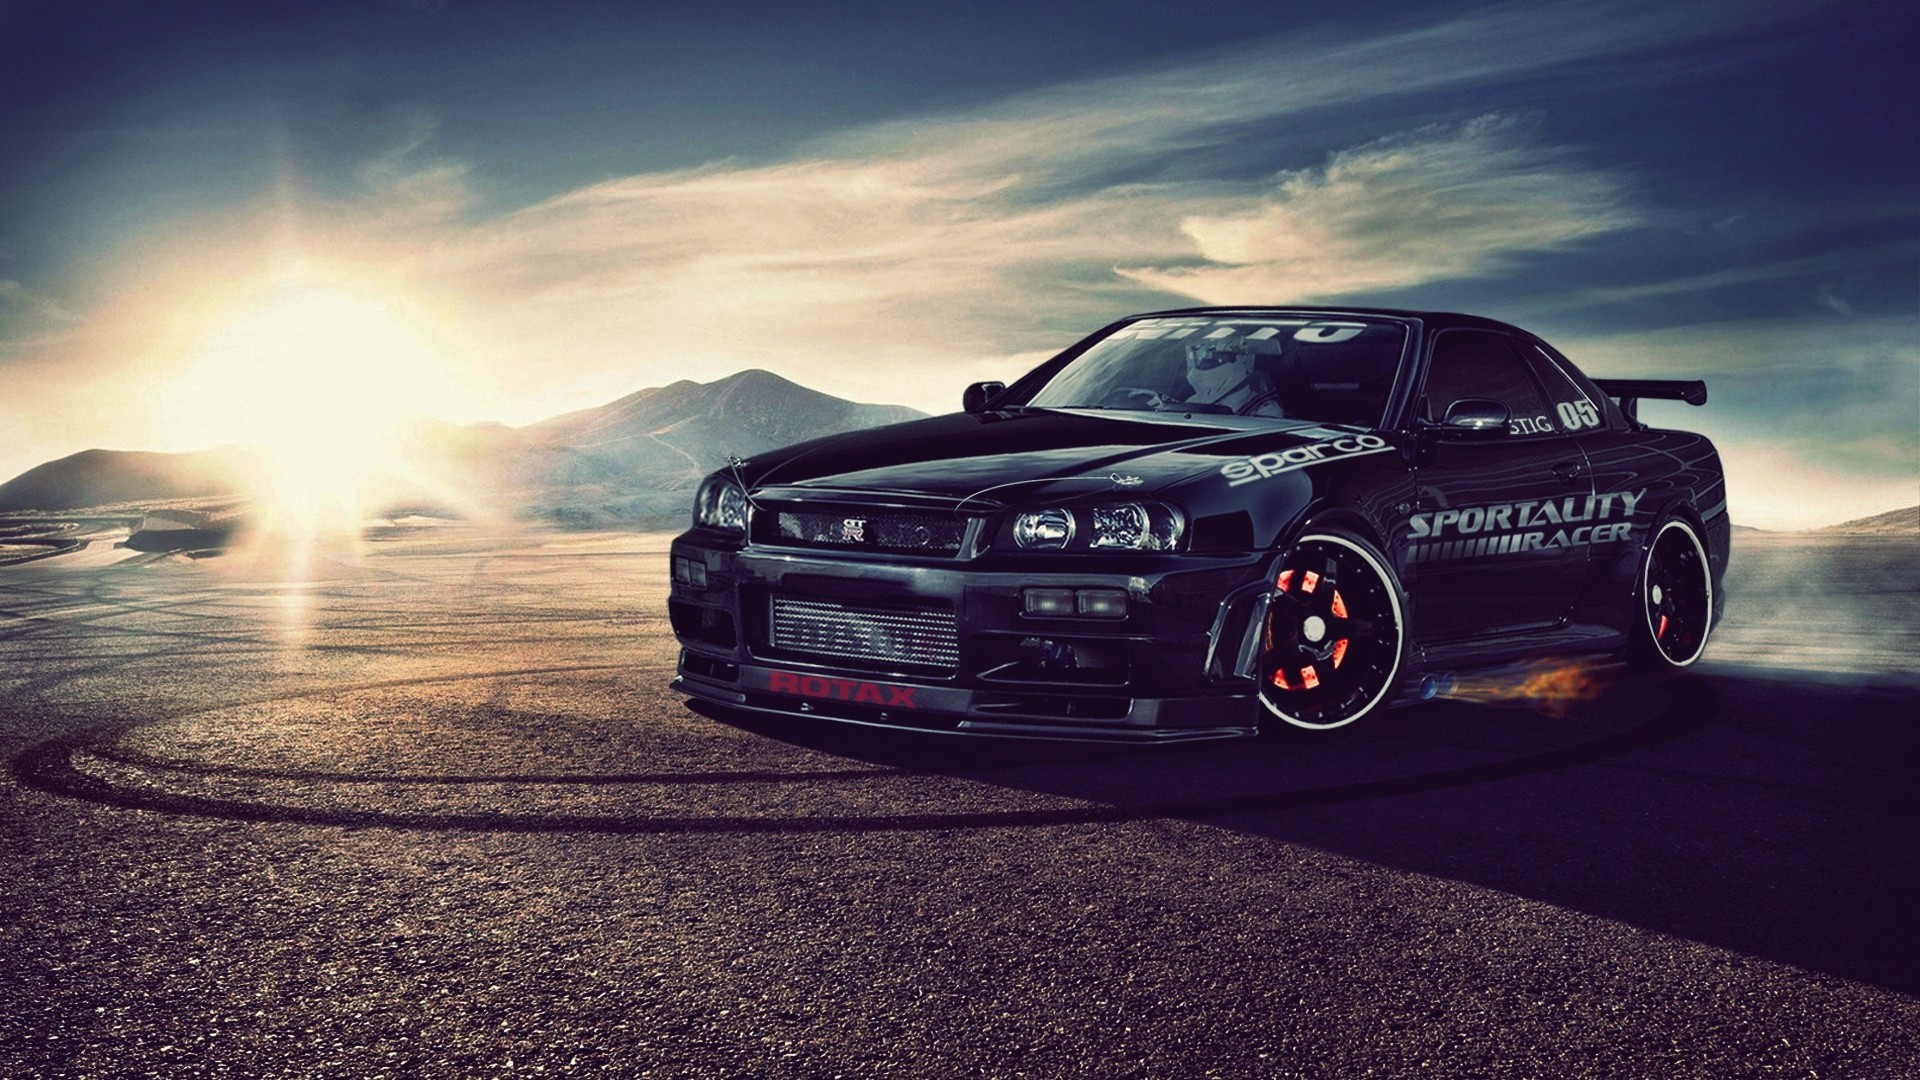 Free Download Nissan Nissan Skyline R34 Gt R Wallpapers 1920x1080